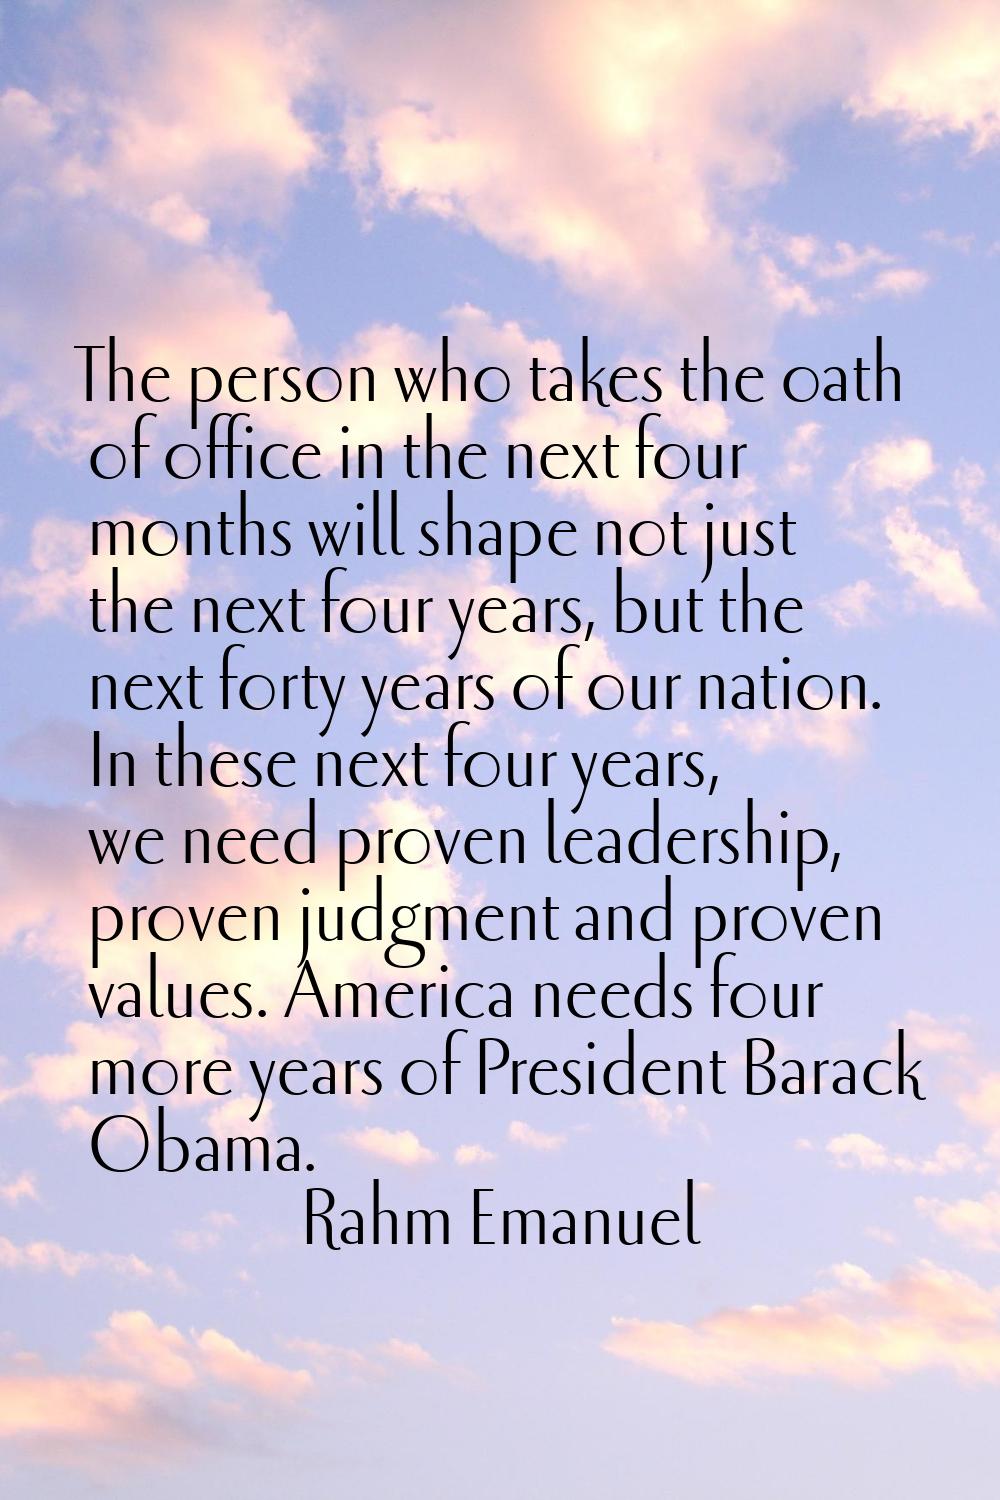 The person who takes the oath of office in the next four months will shape not just the next four y